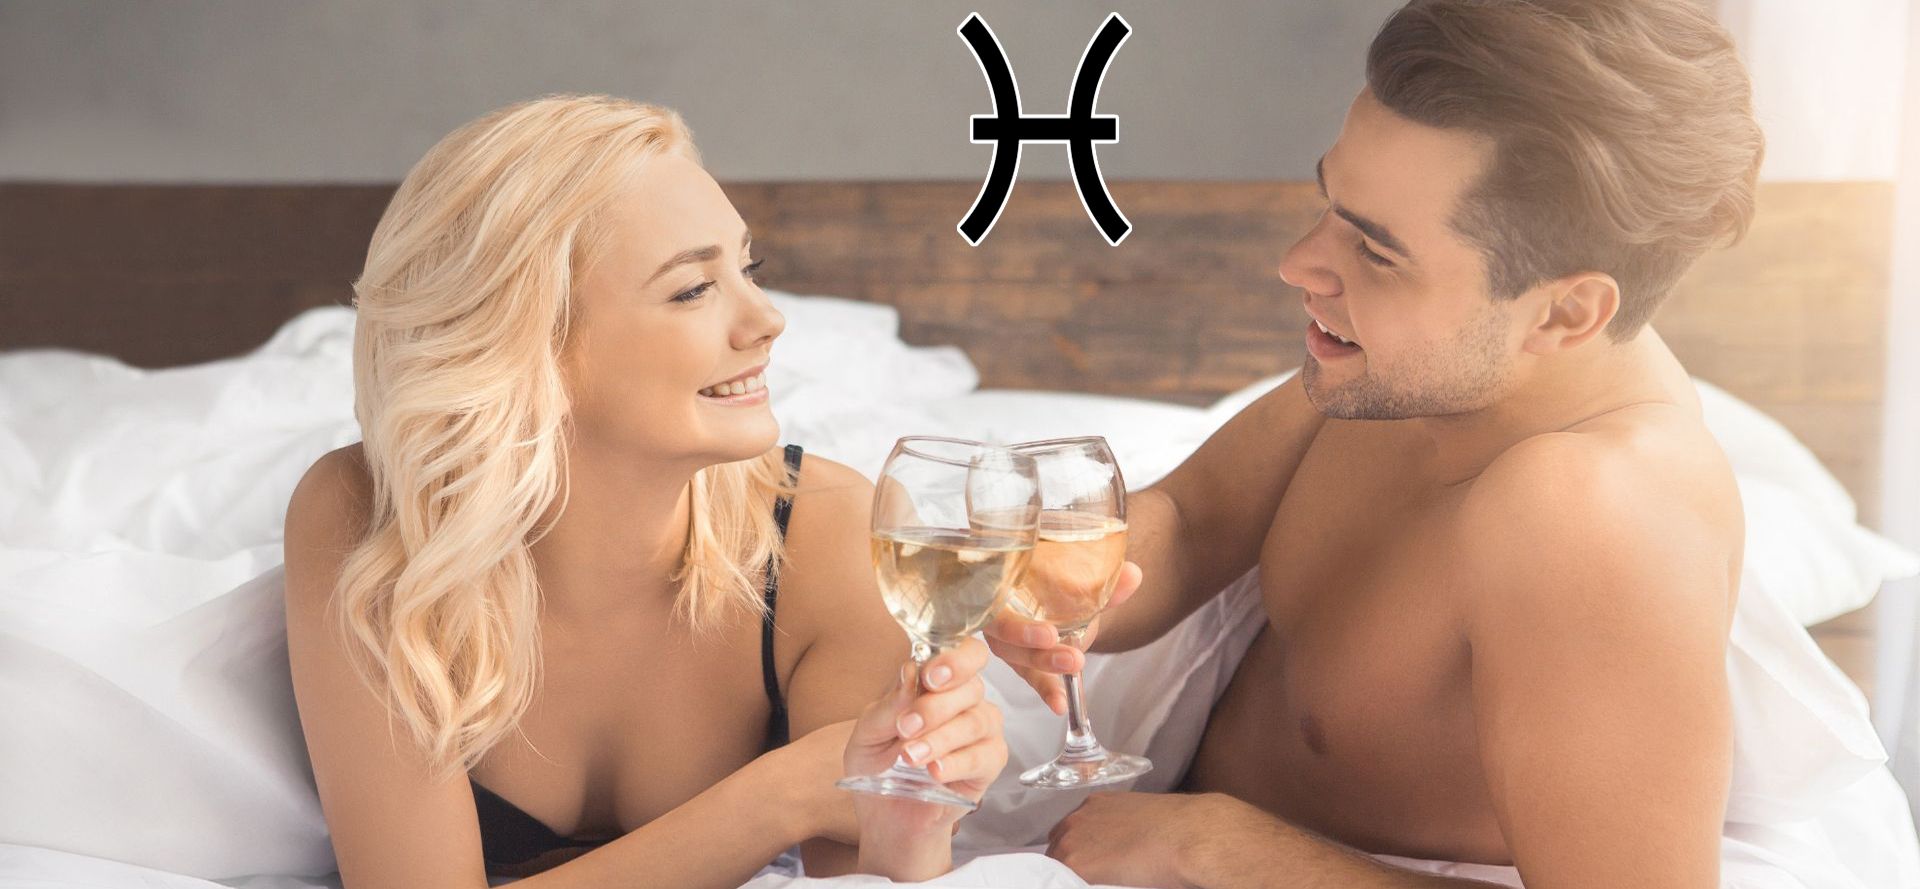 Pisces man is drinking wine with woman in bed.